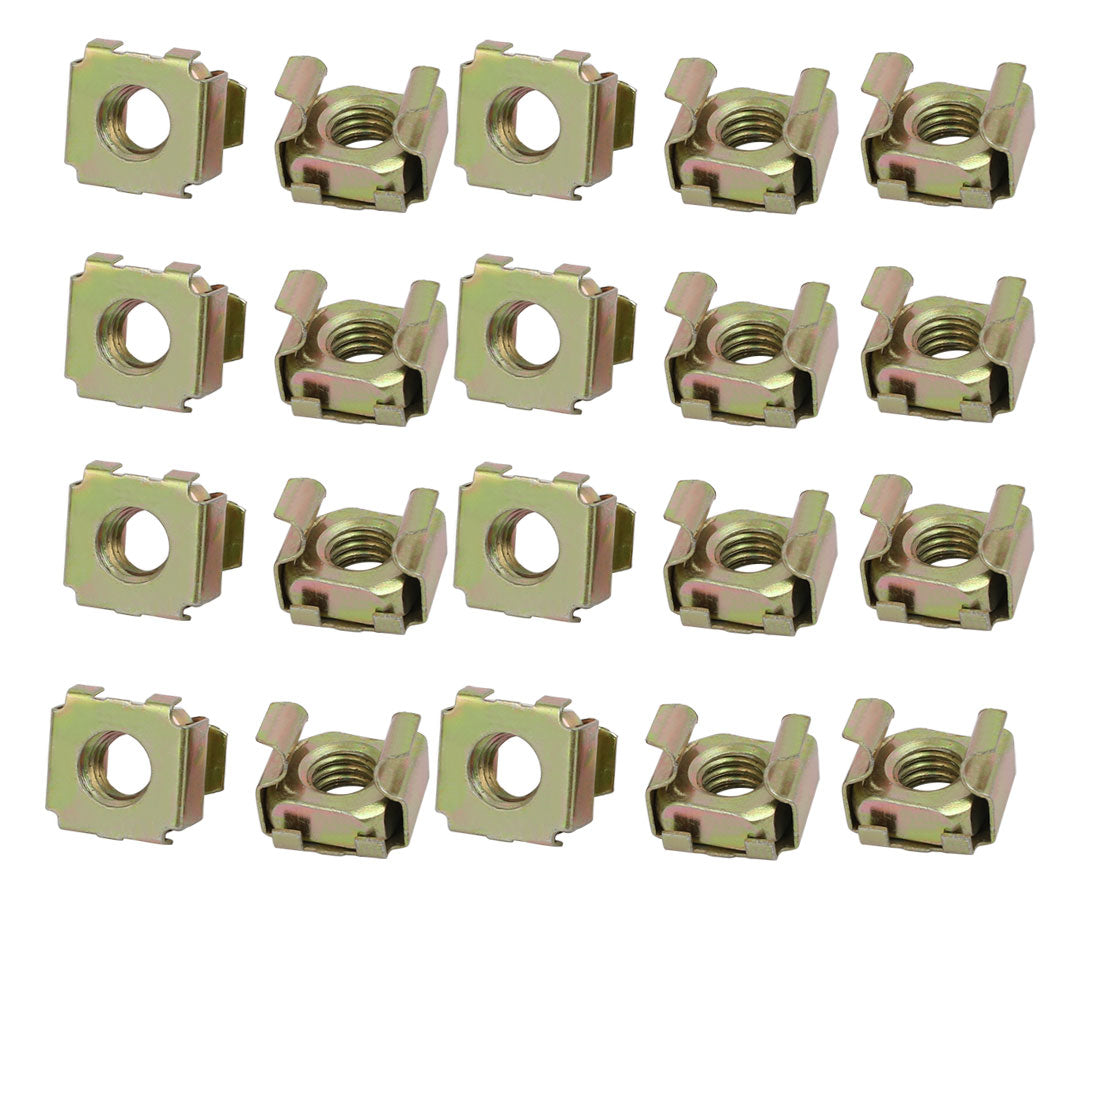 uxcell Uxcell 20pcs M8 Carbon Steel Captive Cage Nut Brass Tone for Server Shelf Cabinet